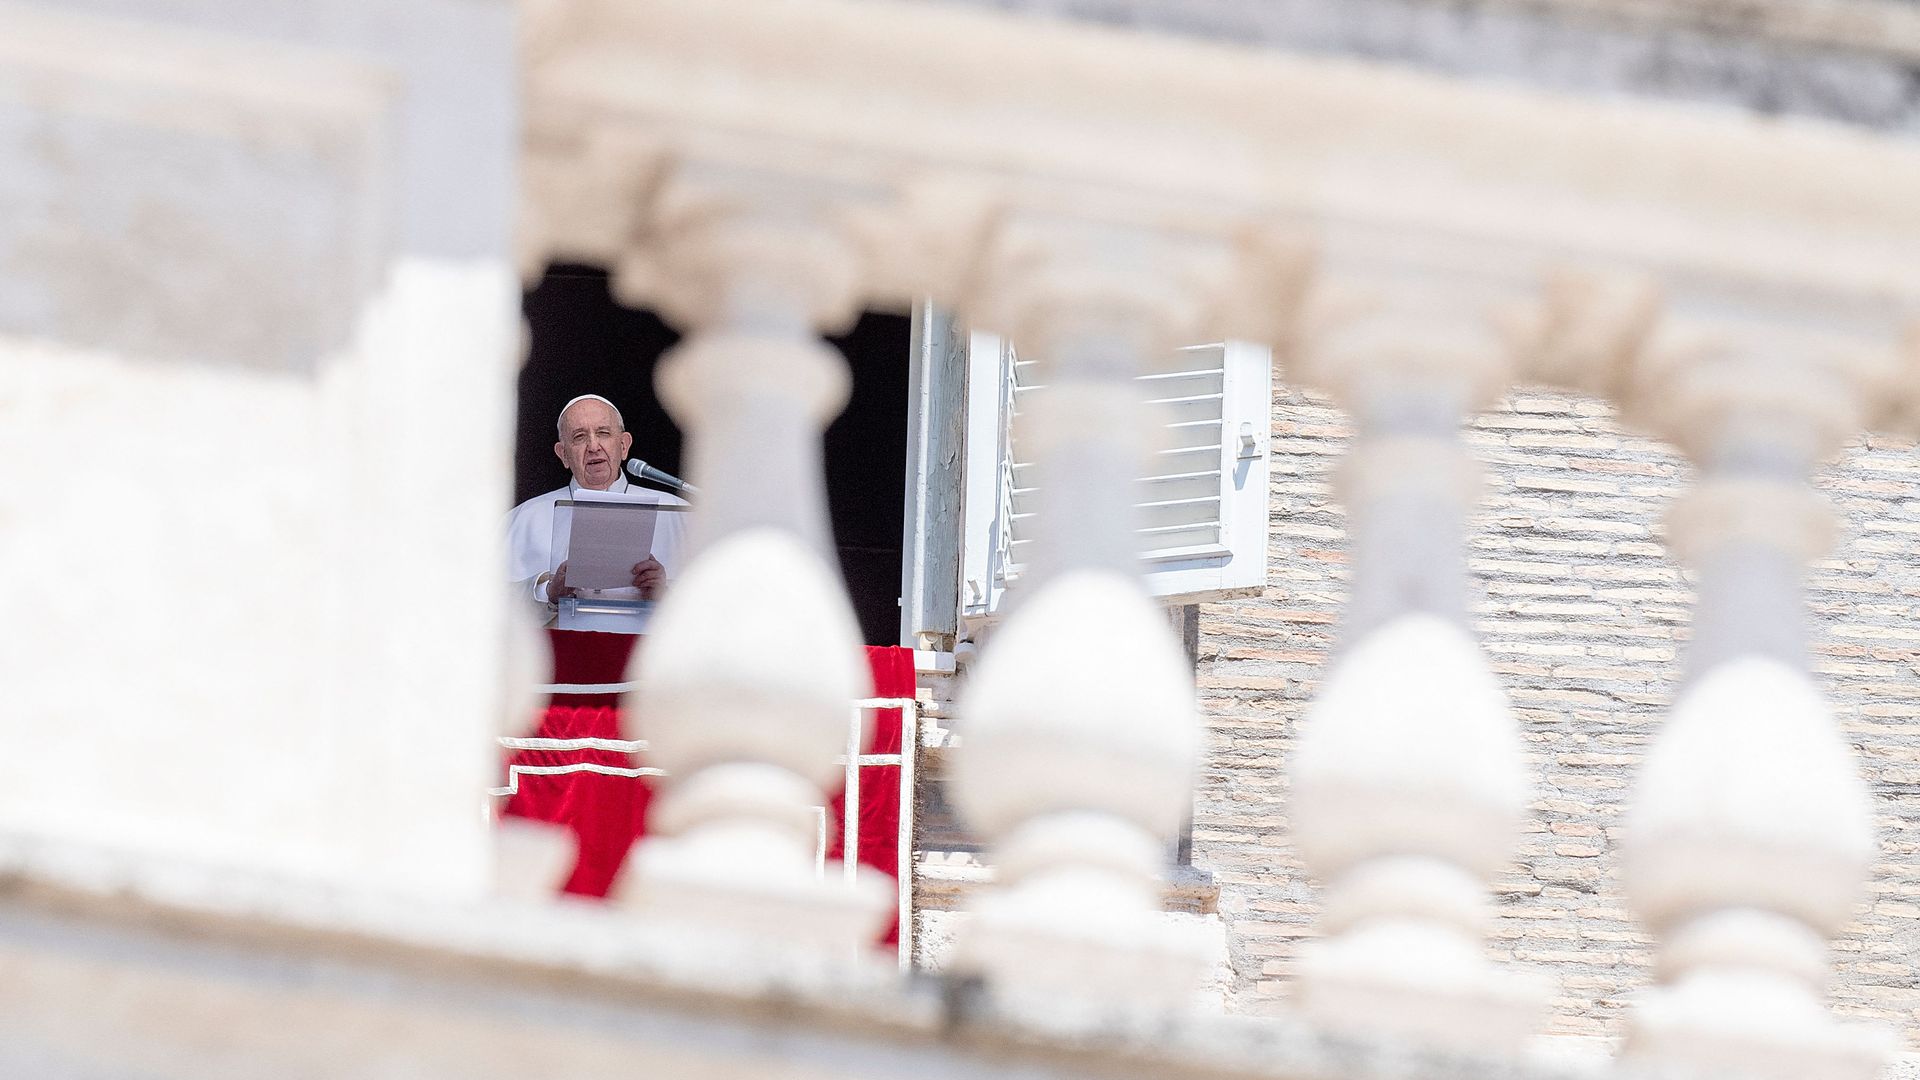 Photo of Pope Francis wearing white and speaking into a mic as he holds a piece of paper, juxtaposed against columns